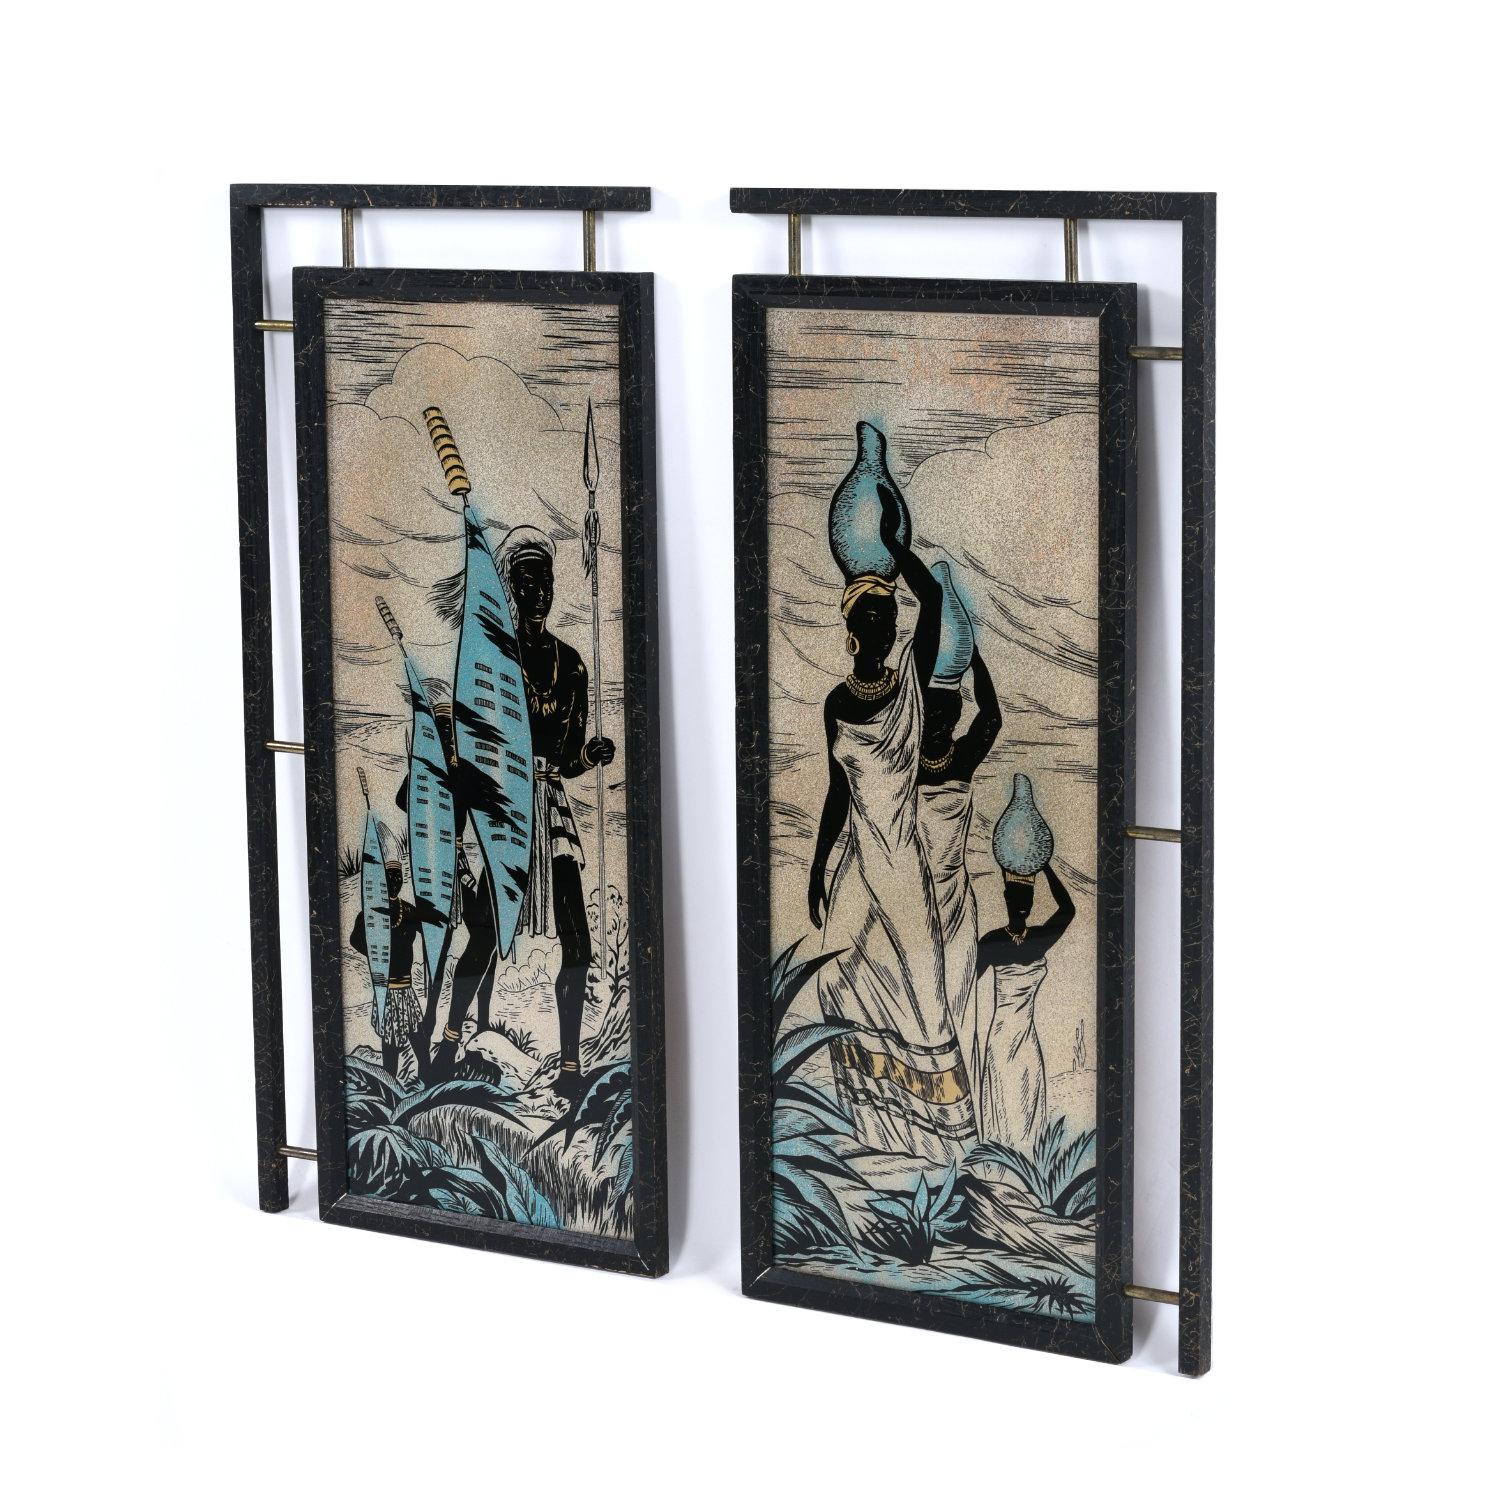 Utterly unique pair of Mid-Century Modern painted glass panels depicting African figures. The diptych features African warriors on one side, and women carrying water on the second panel. The captivating image is actually painted on glass panels…